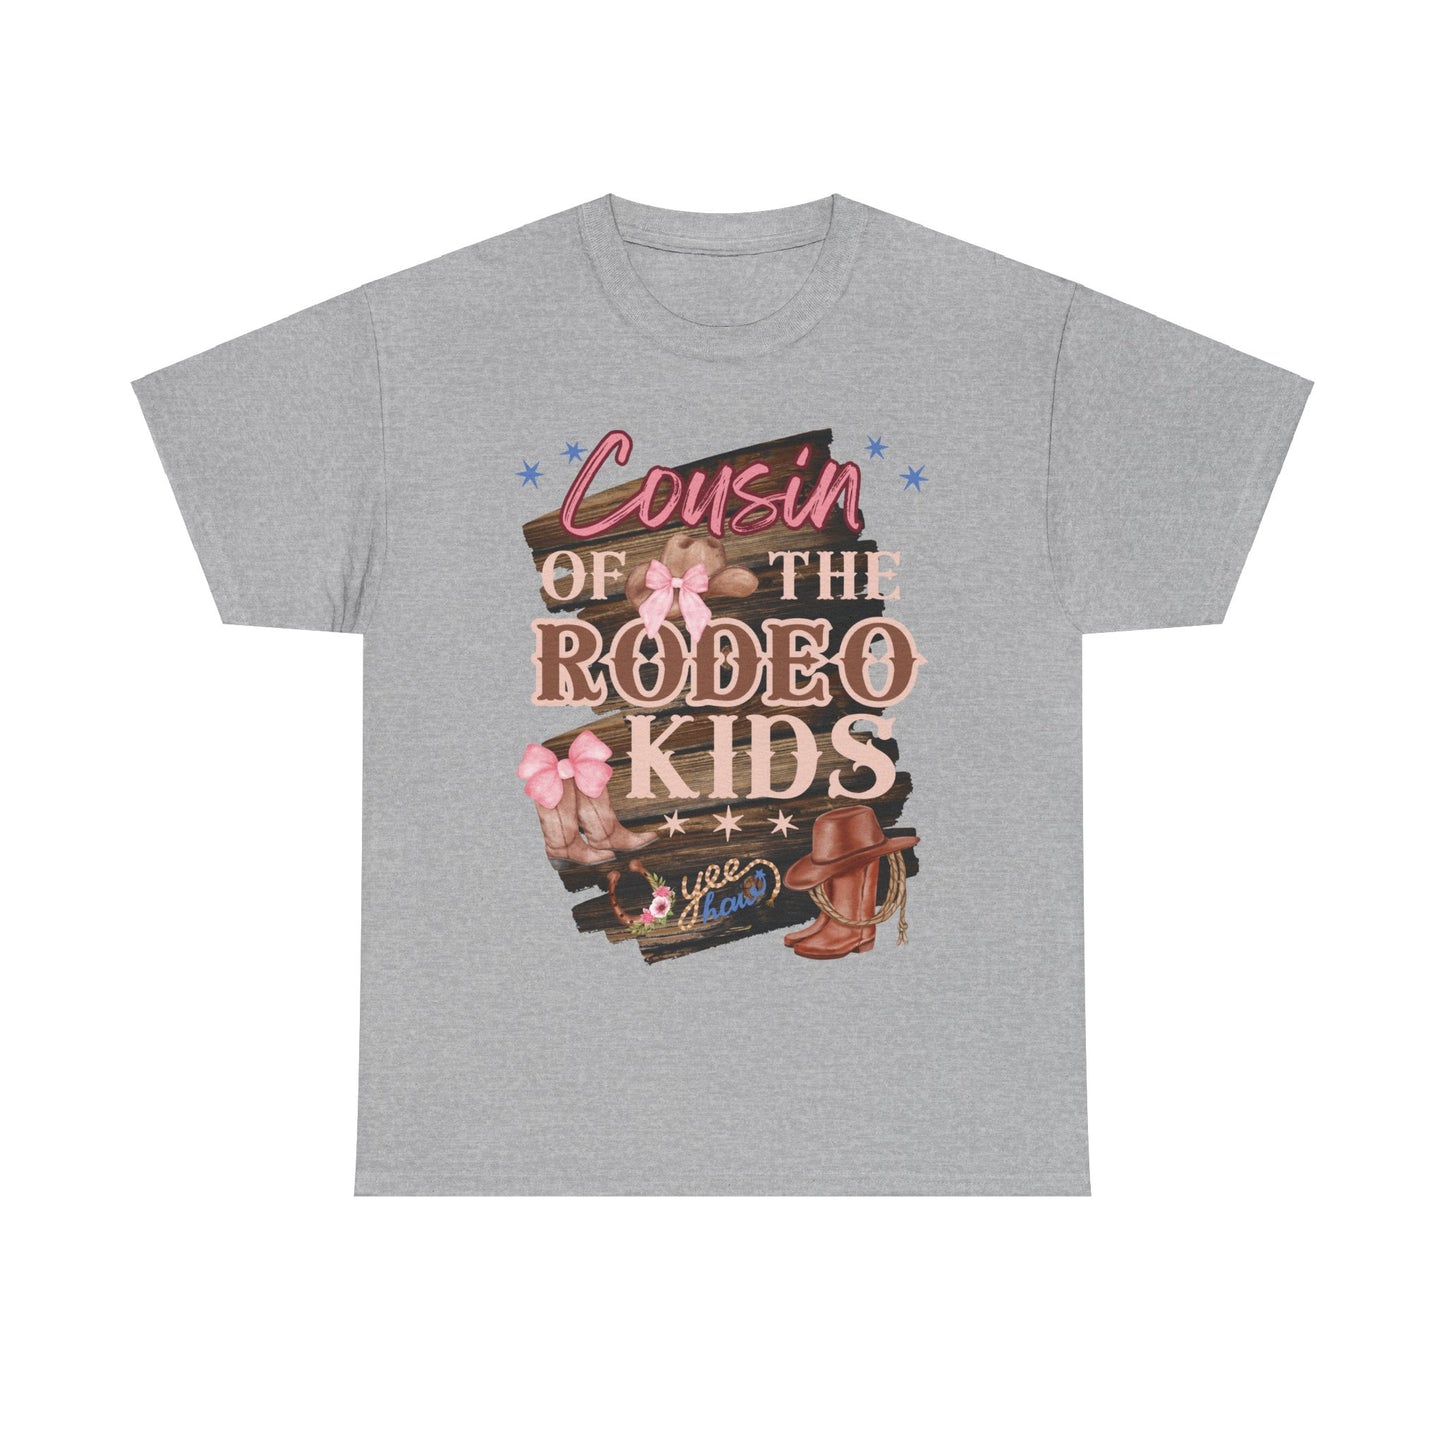 Cousin of the Rodeo Kids (Pink, Adult)